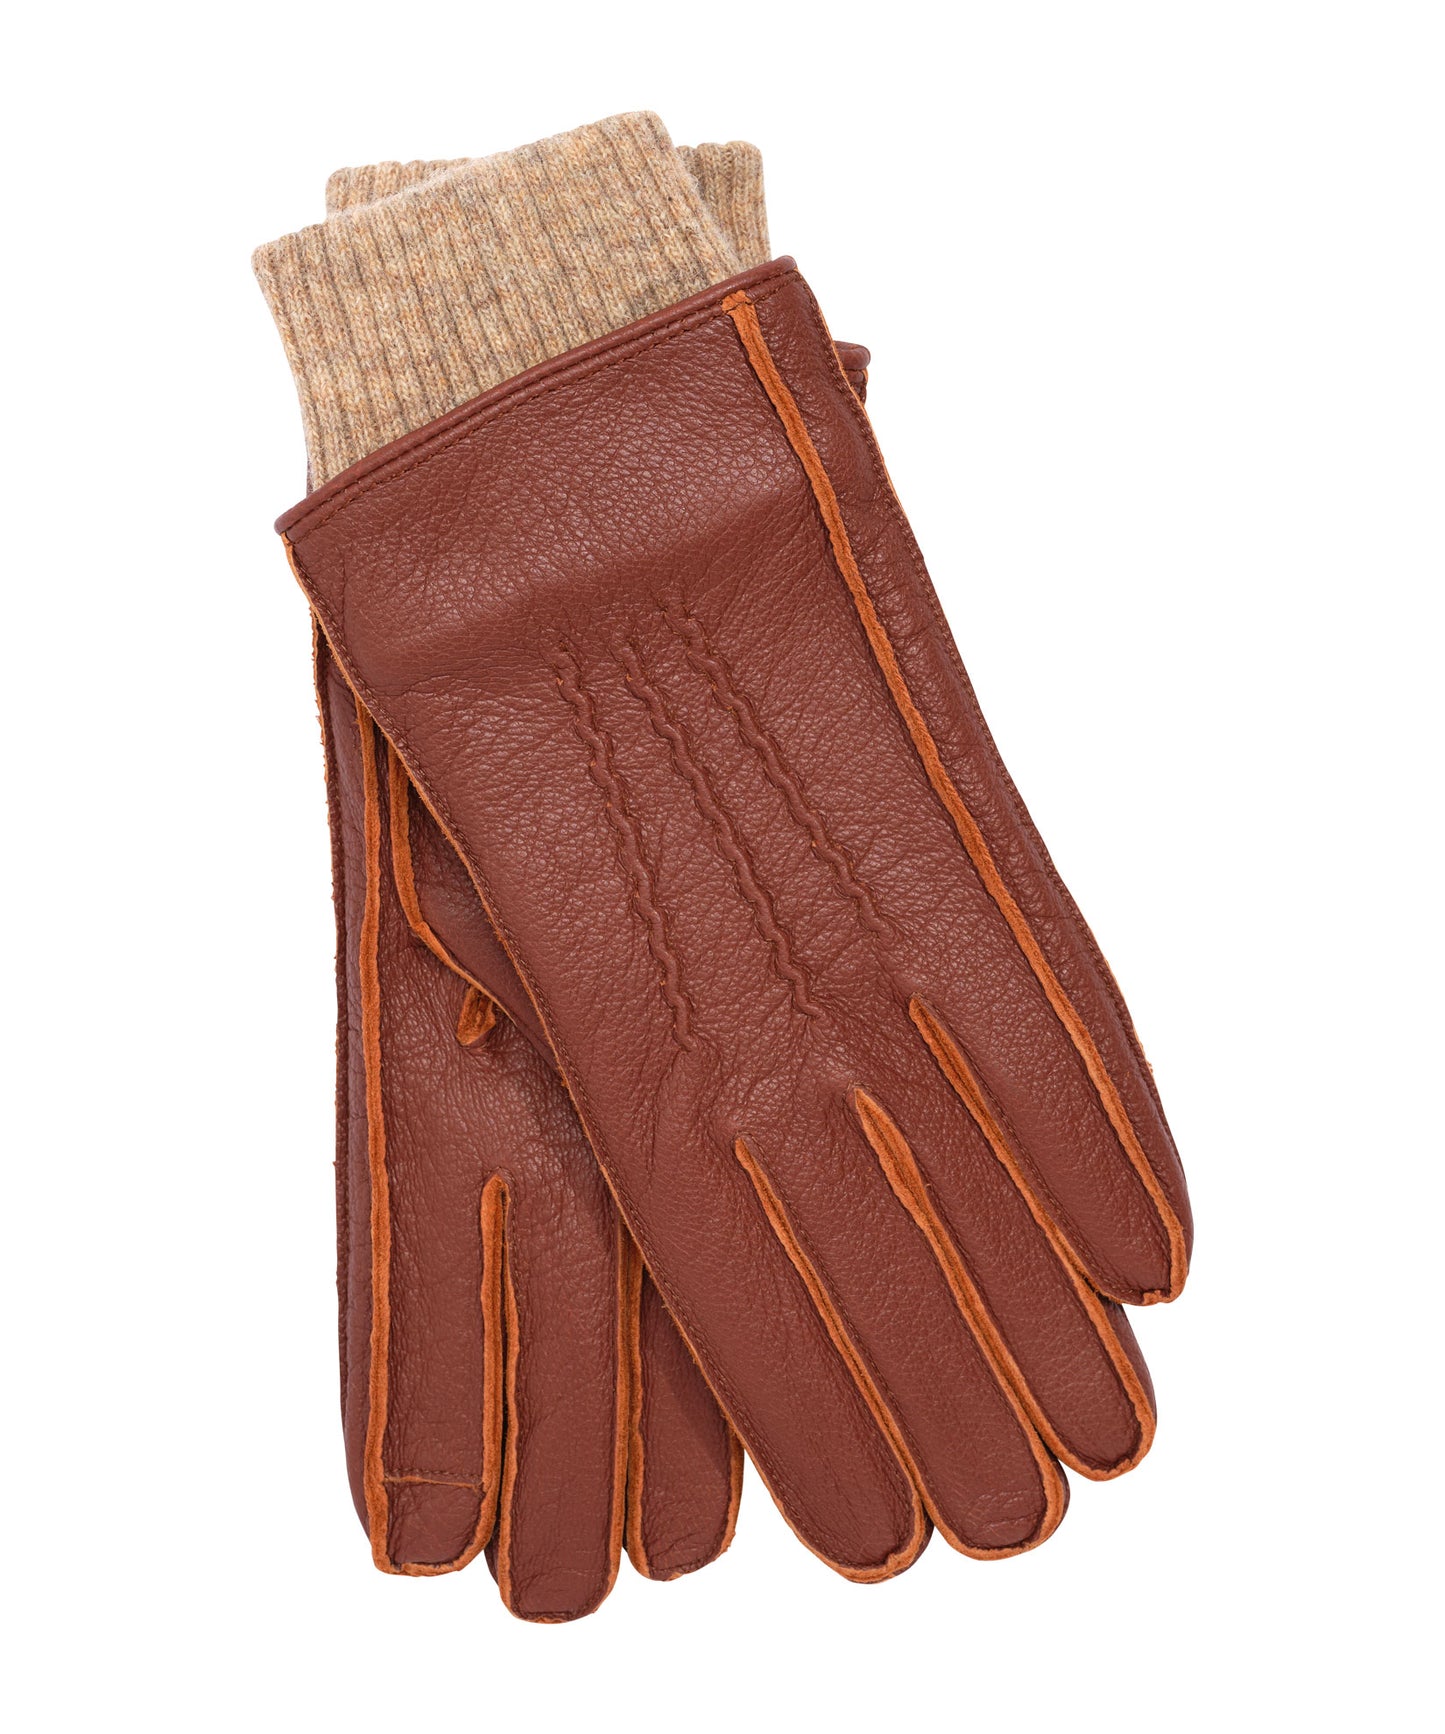 Leather Glove with Knit Cuff